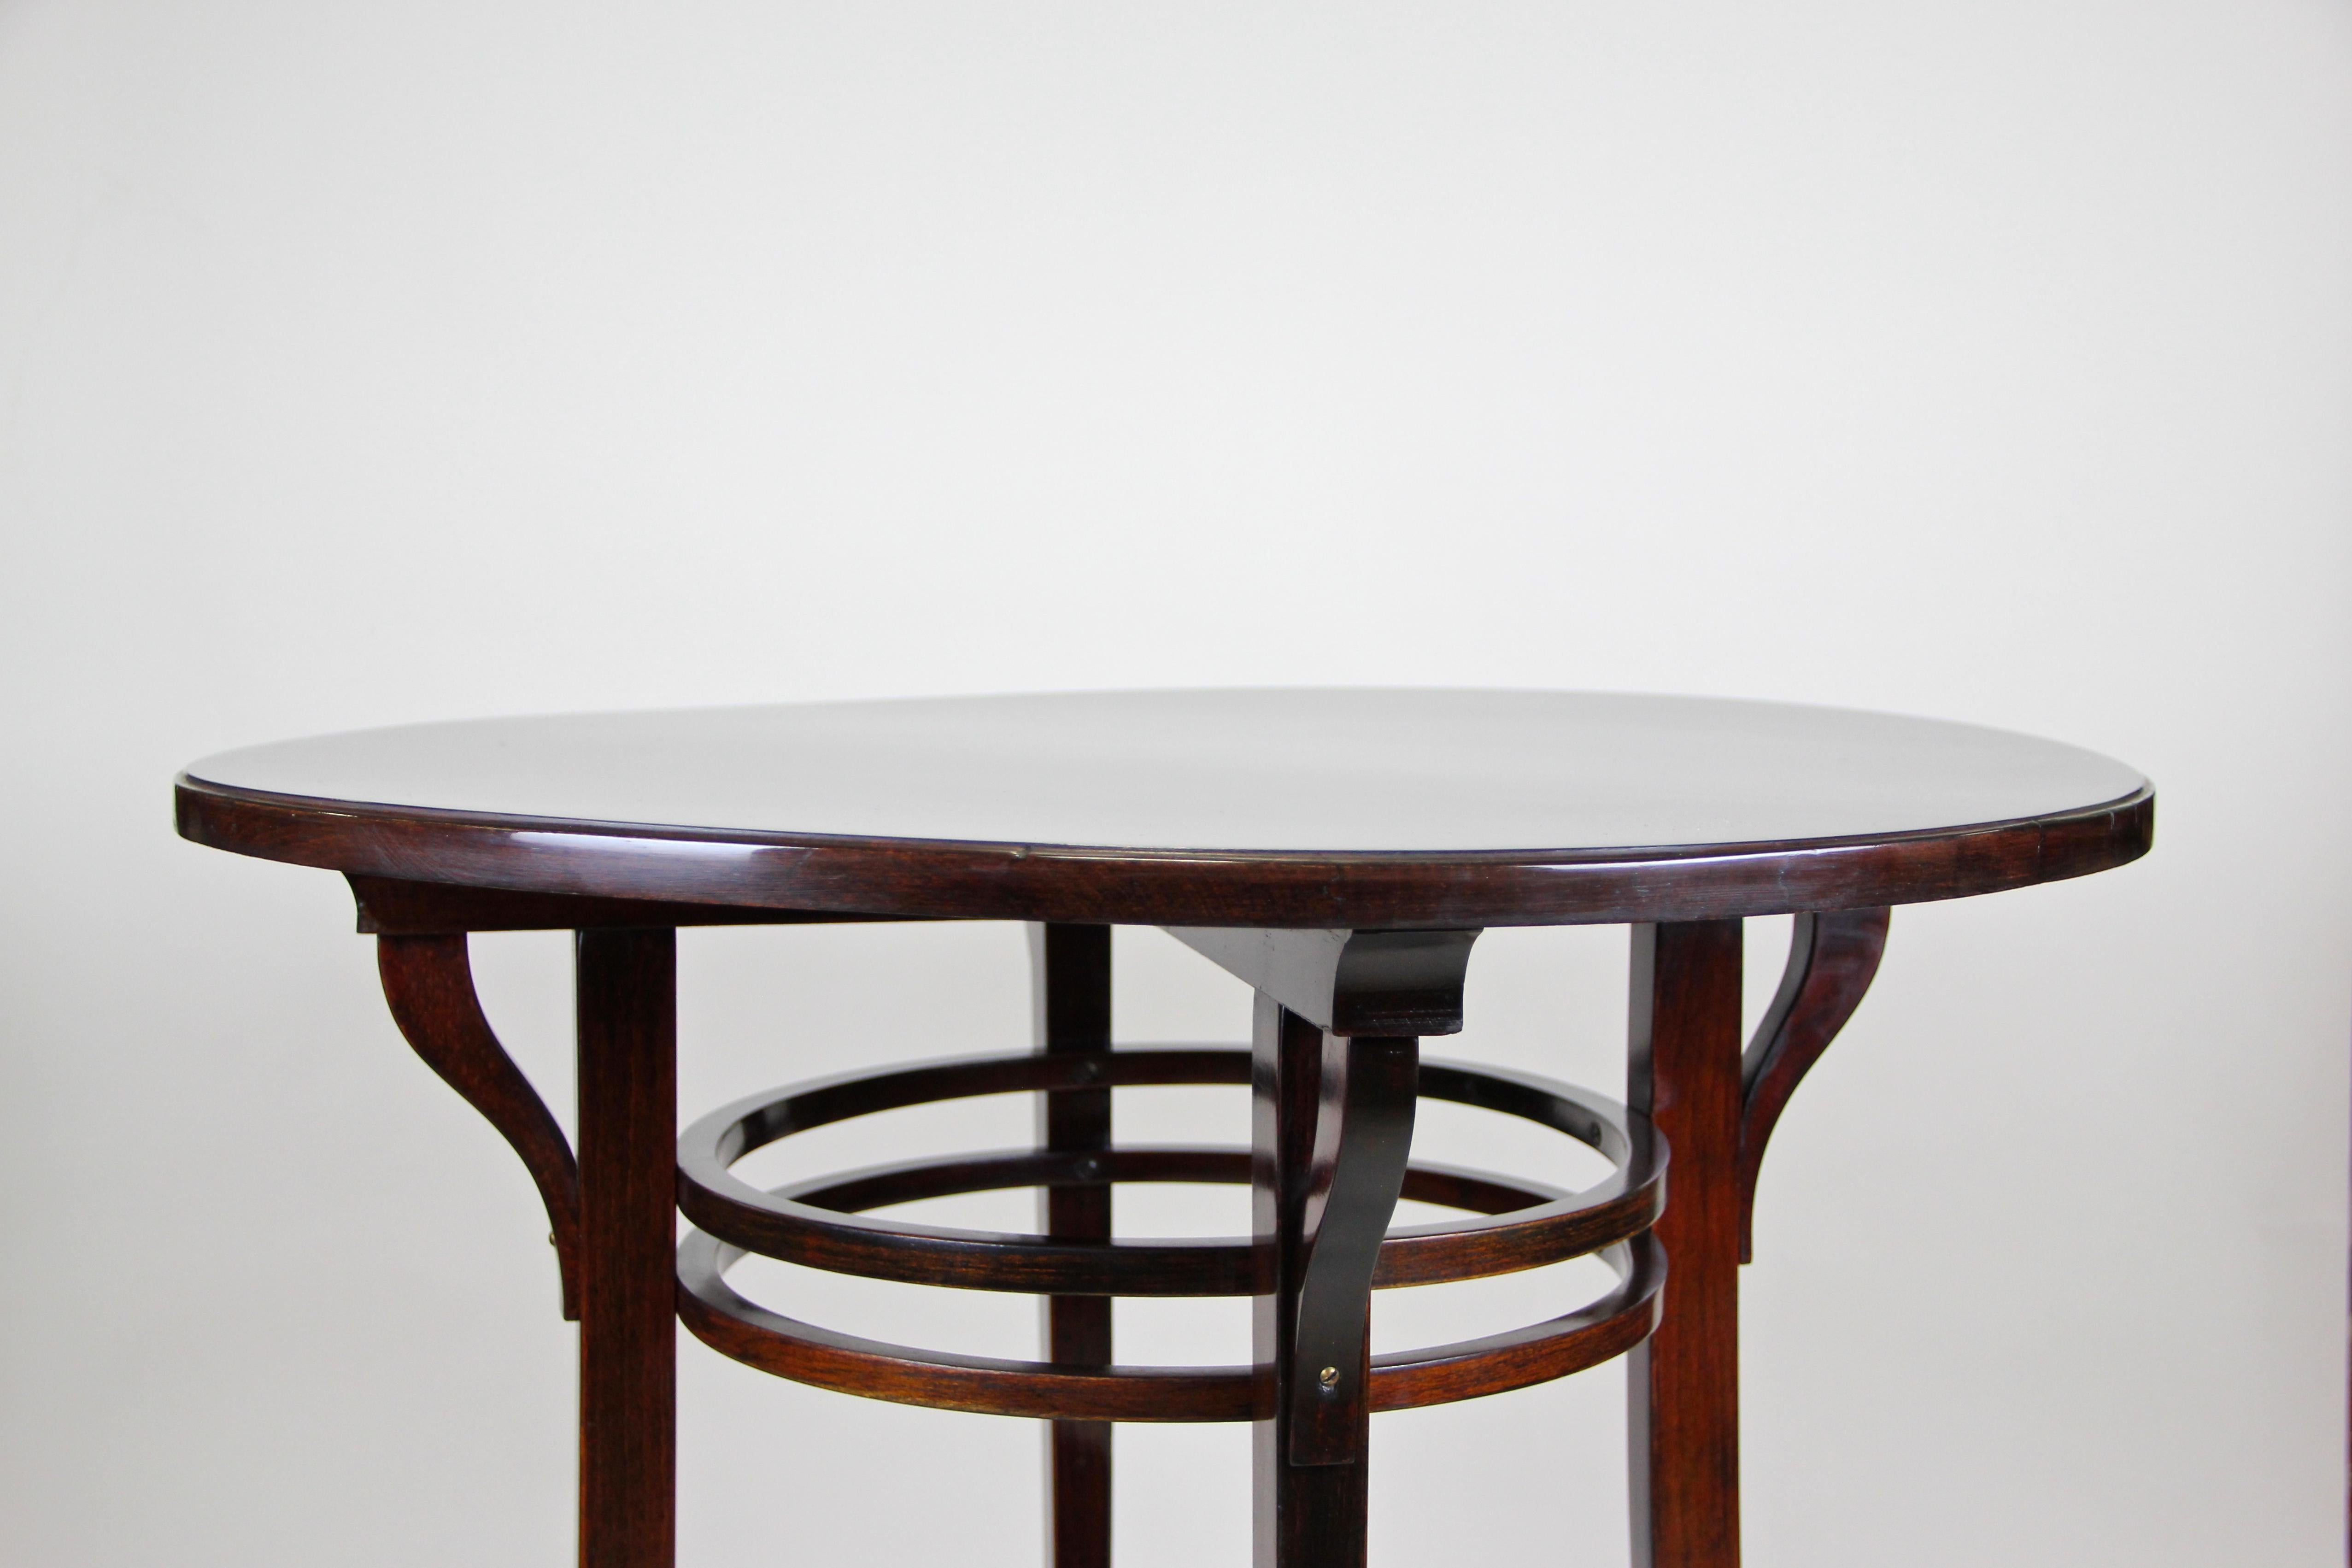 Timeless bentwood side table by the famous company of Thonet Vienna/ Austria from the early 20th century, circa 1905. The round table comes with a great design and shows an extra small floating compartment in the lower third. The table top is